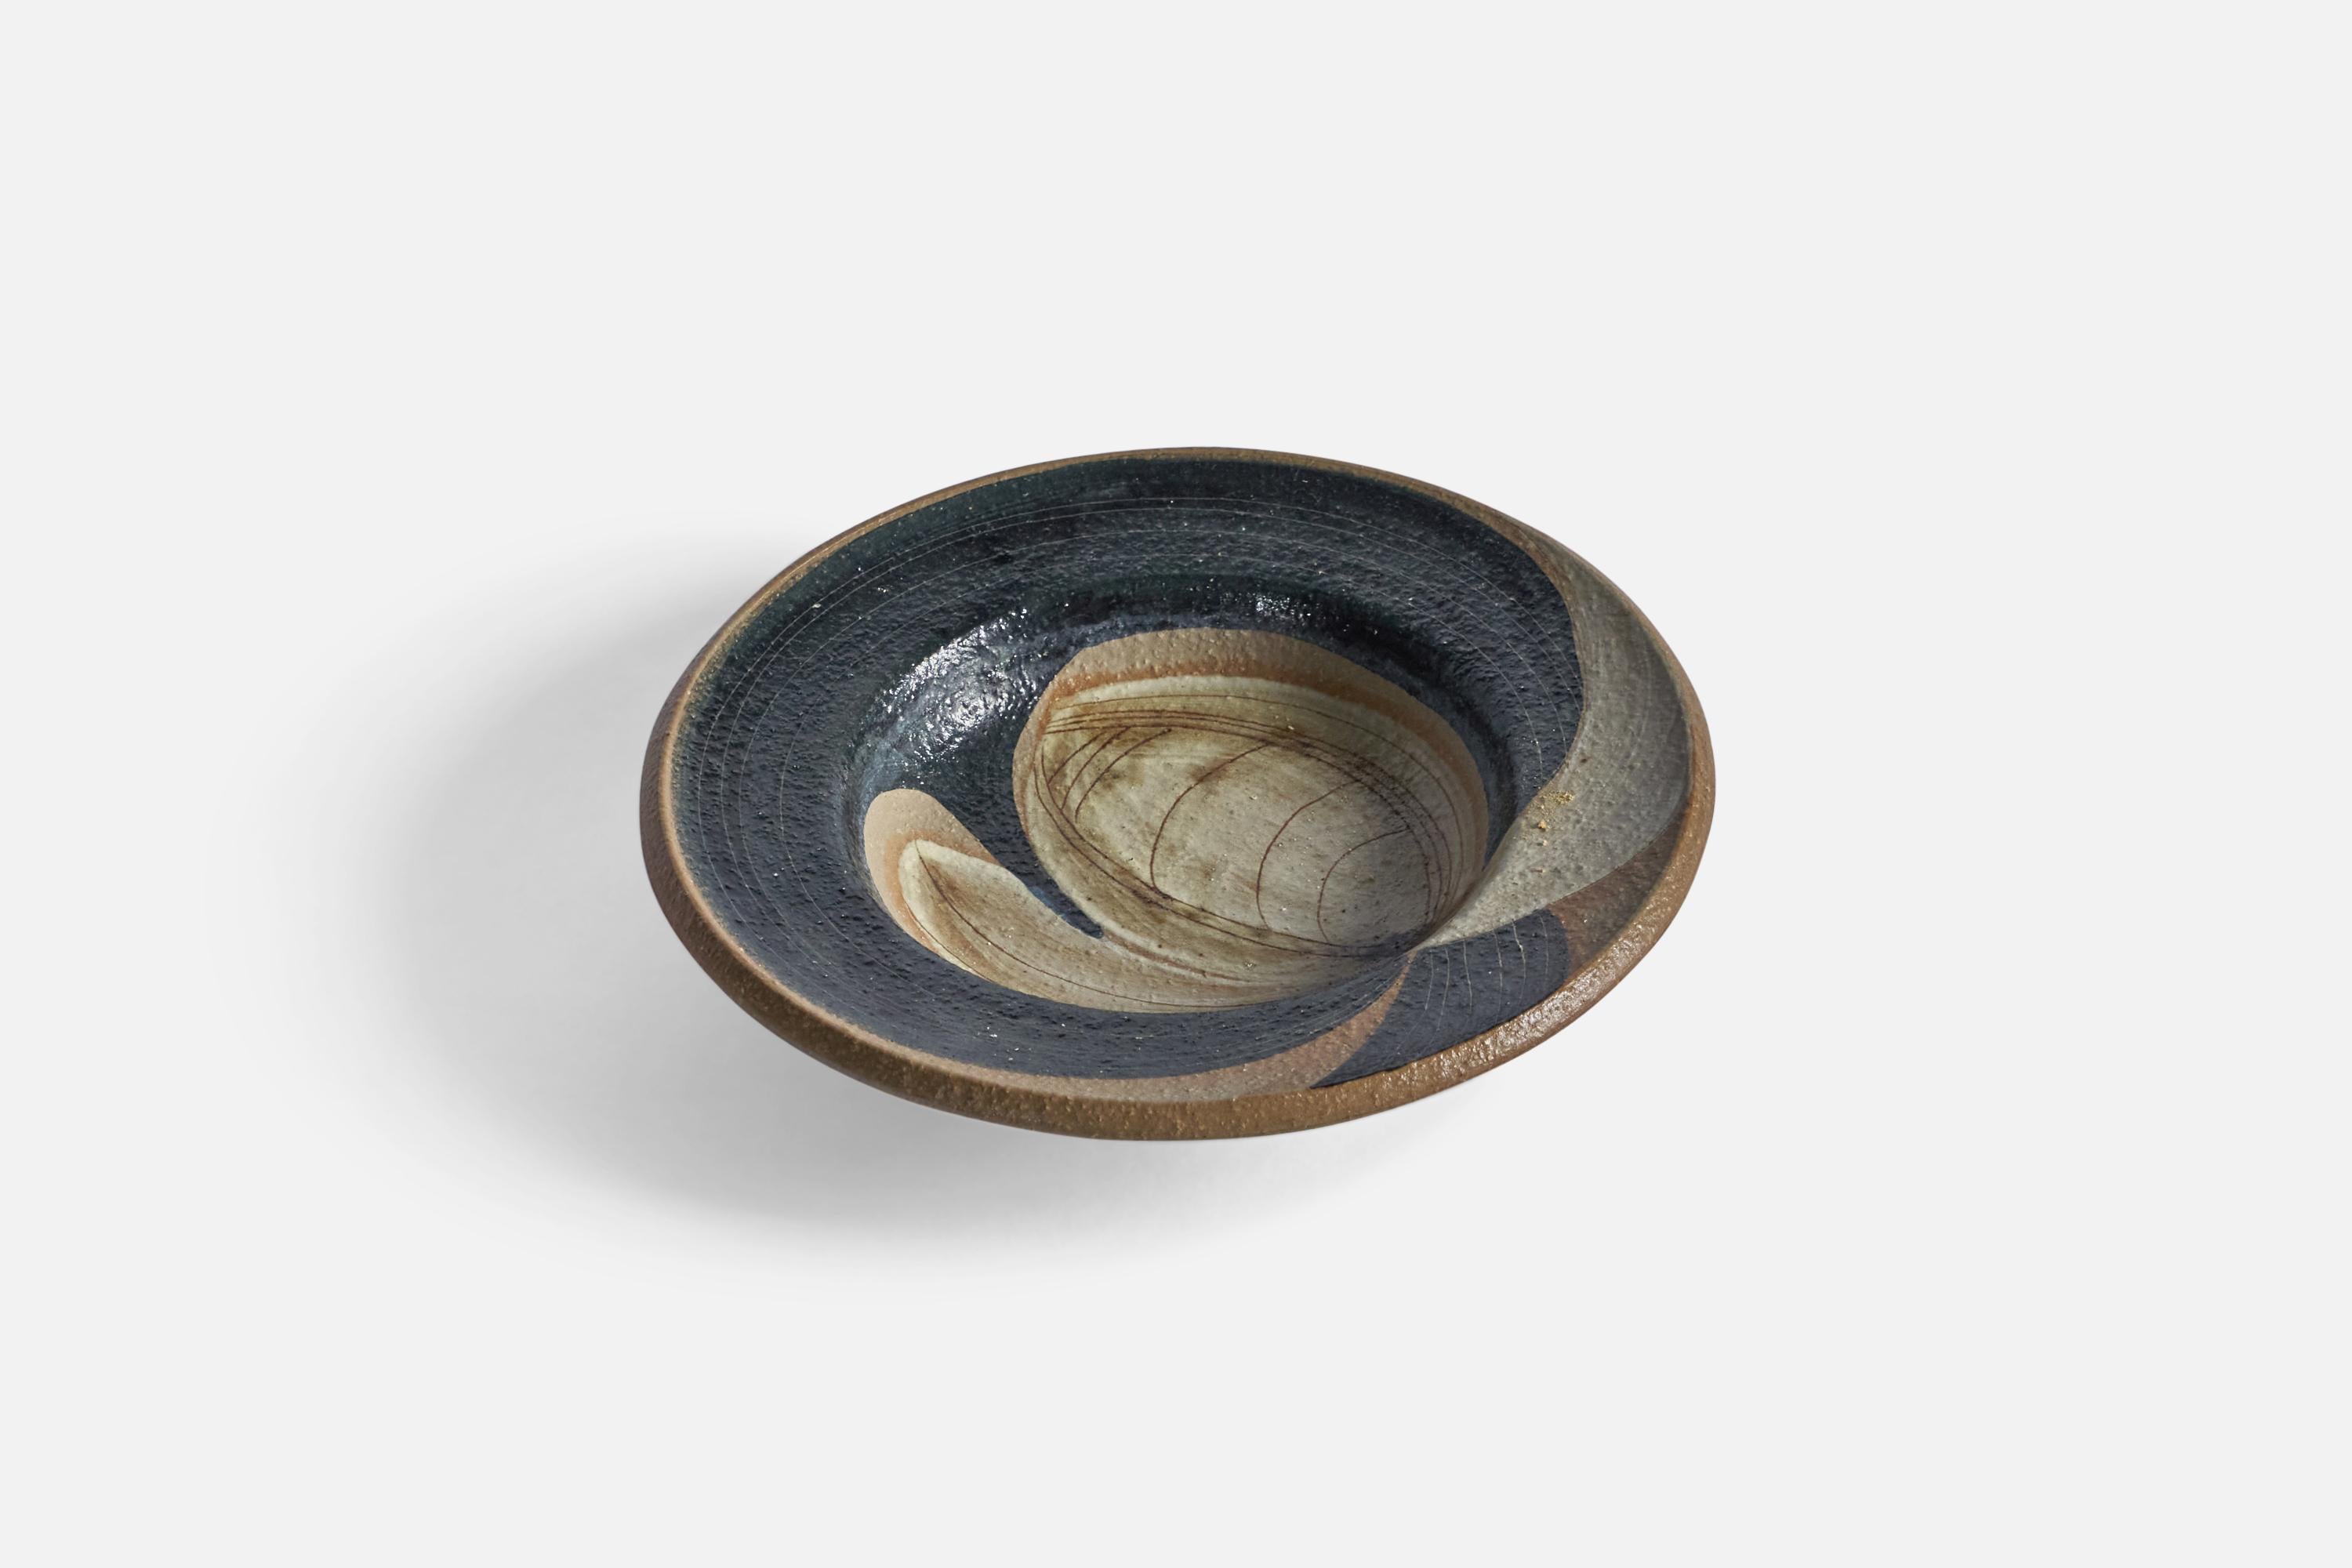 A black and beige painted stoneware dish, designed by Noomi Backhausen and produced by Søholm, Bornholm, Denmark, c. 1960s.